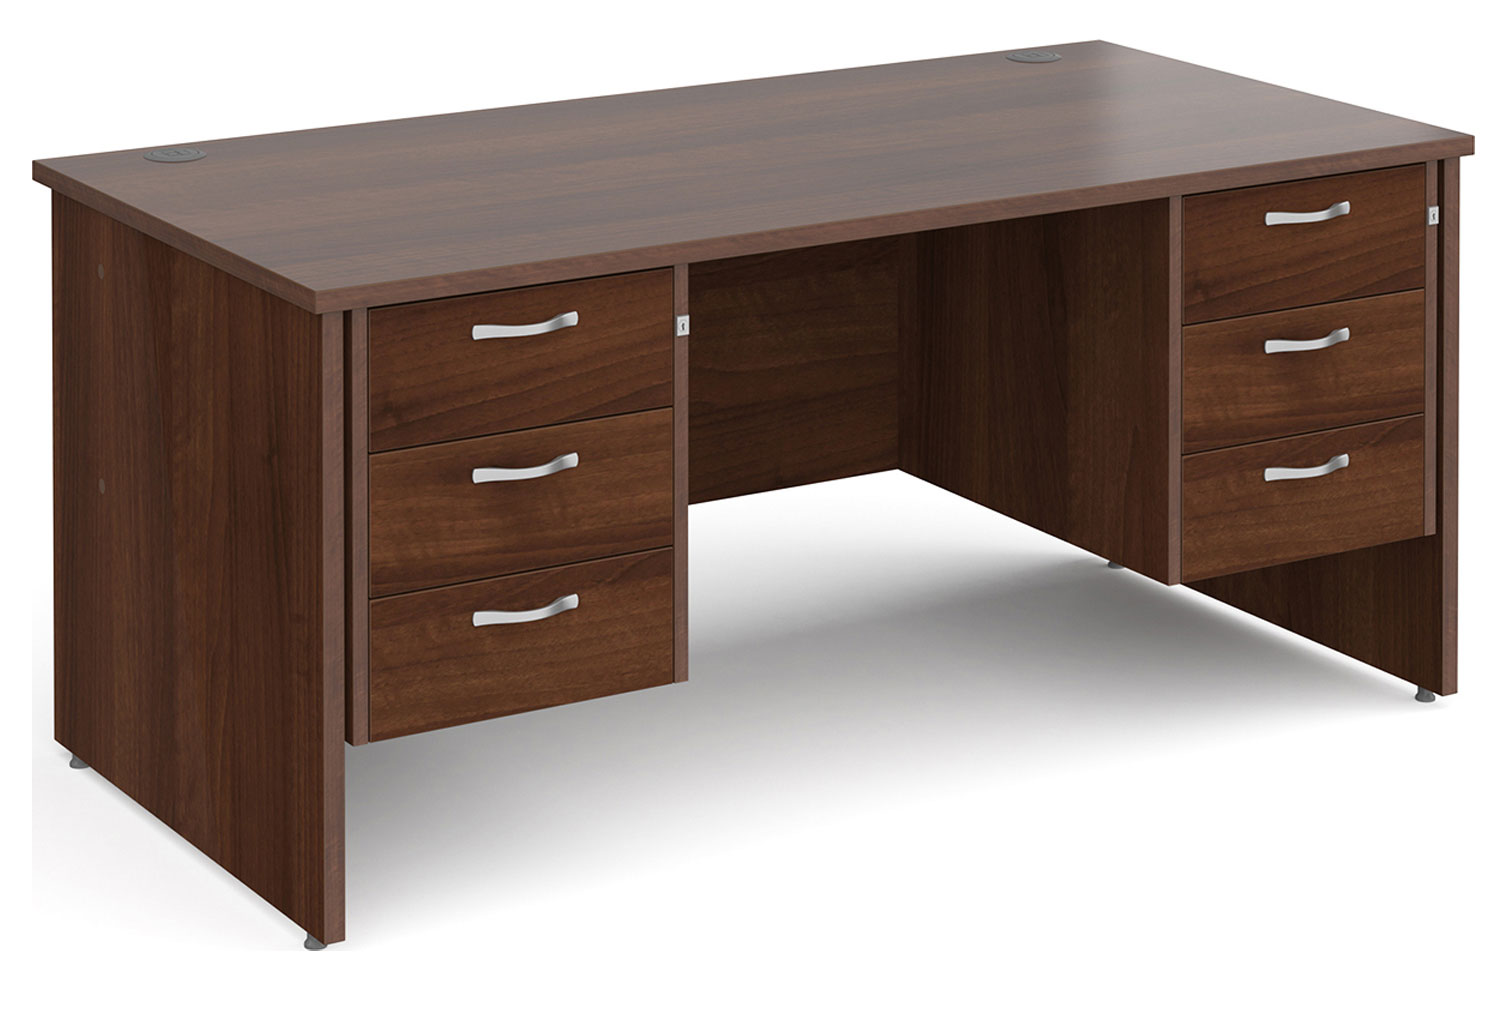 All Walnut Panel End Executive Office Desk 3+3 Drawers, 160wx80dx73h (cm), Express Delivery